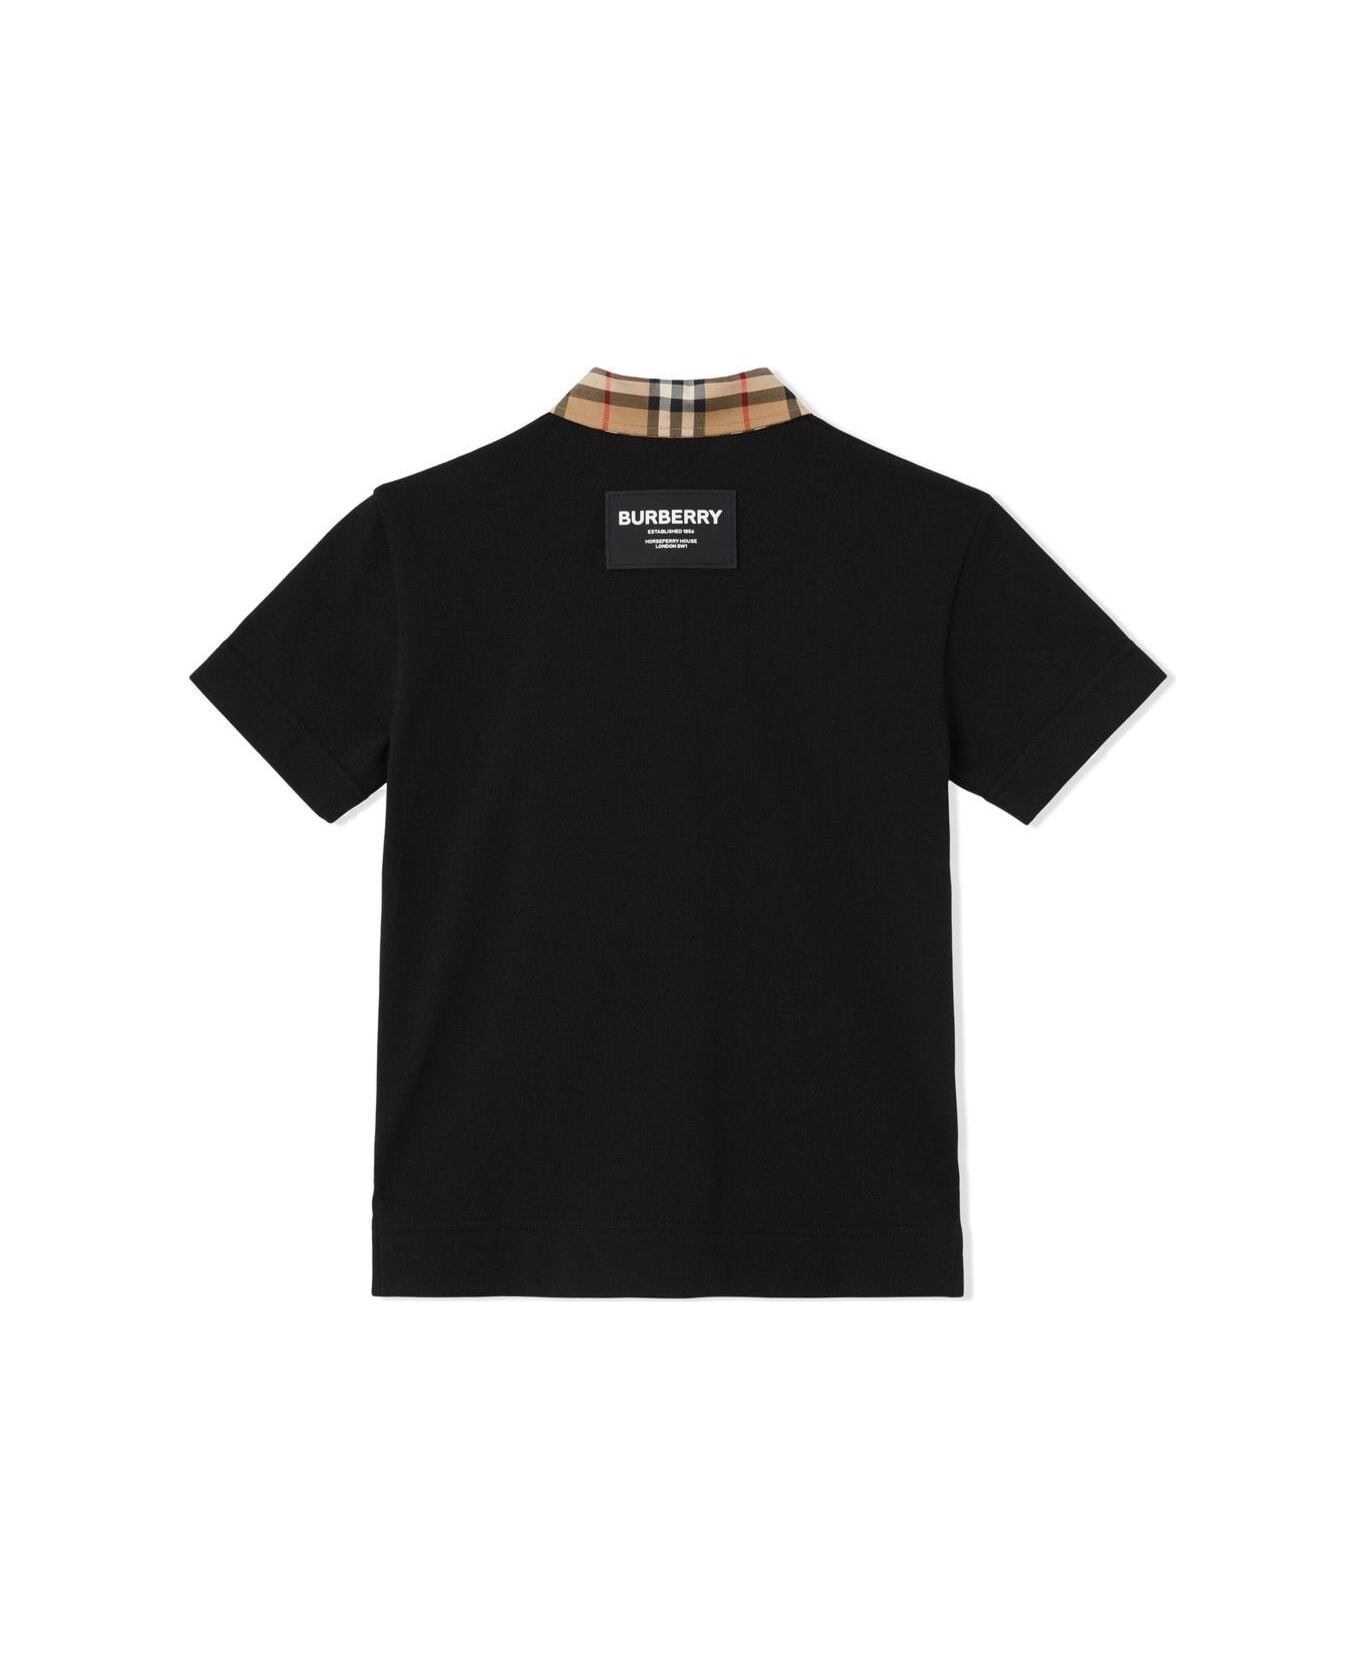 Burberry Black Polo T-shirt With Vintage Check Motif In Cotton Baby - Black